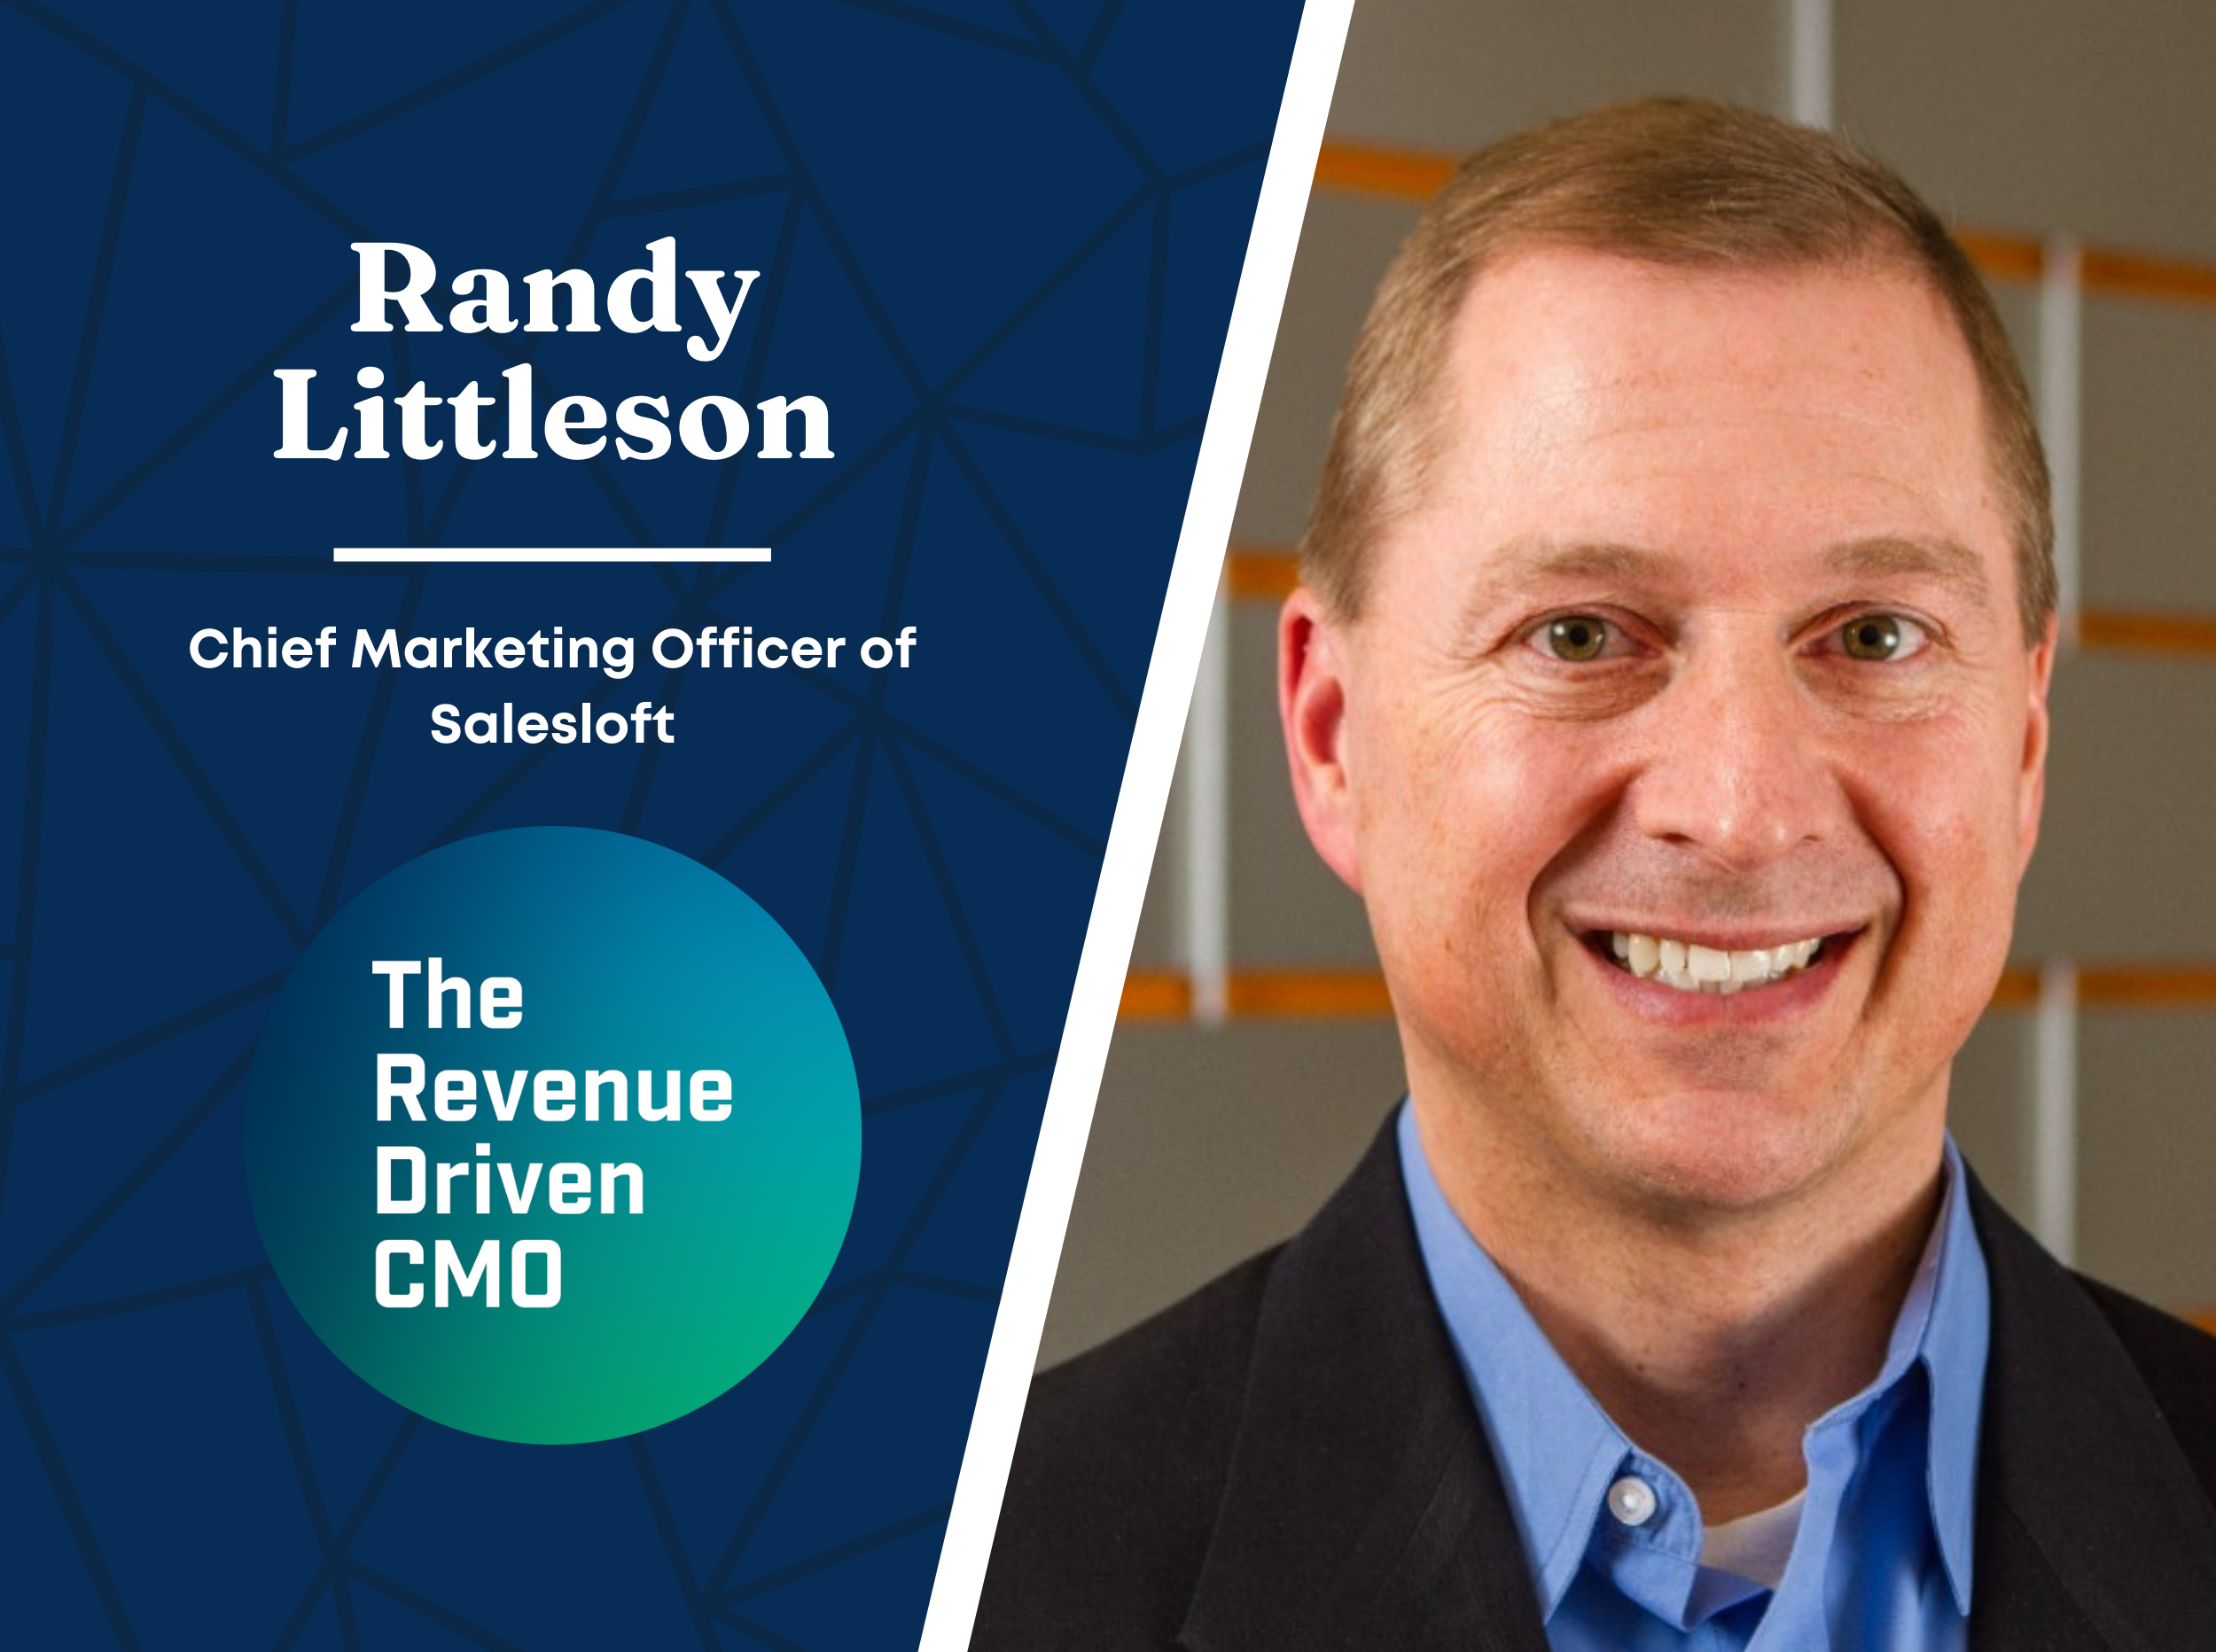 Aligning Marketing Goals to Empower the Revenue Team with Randy Littleson